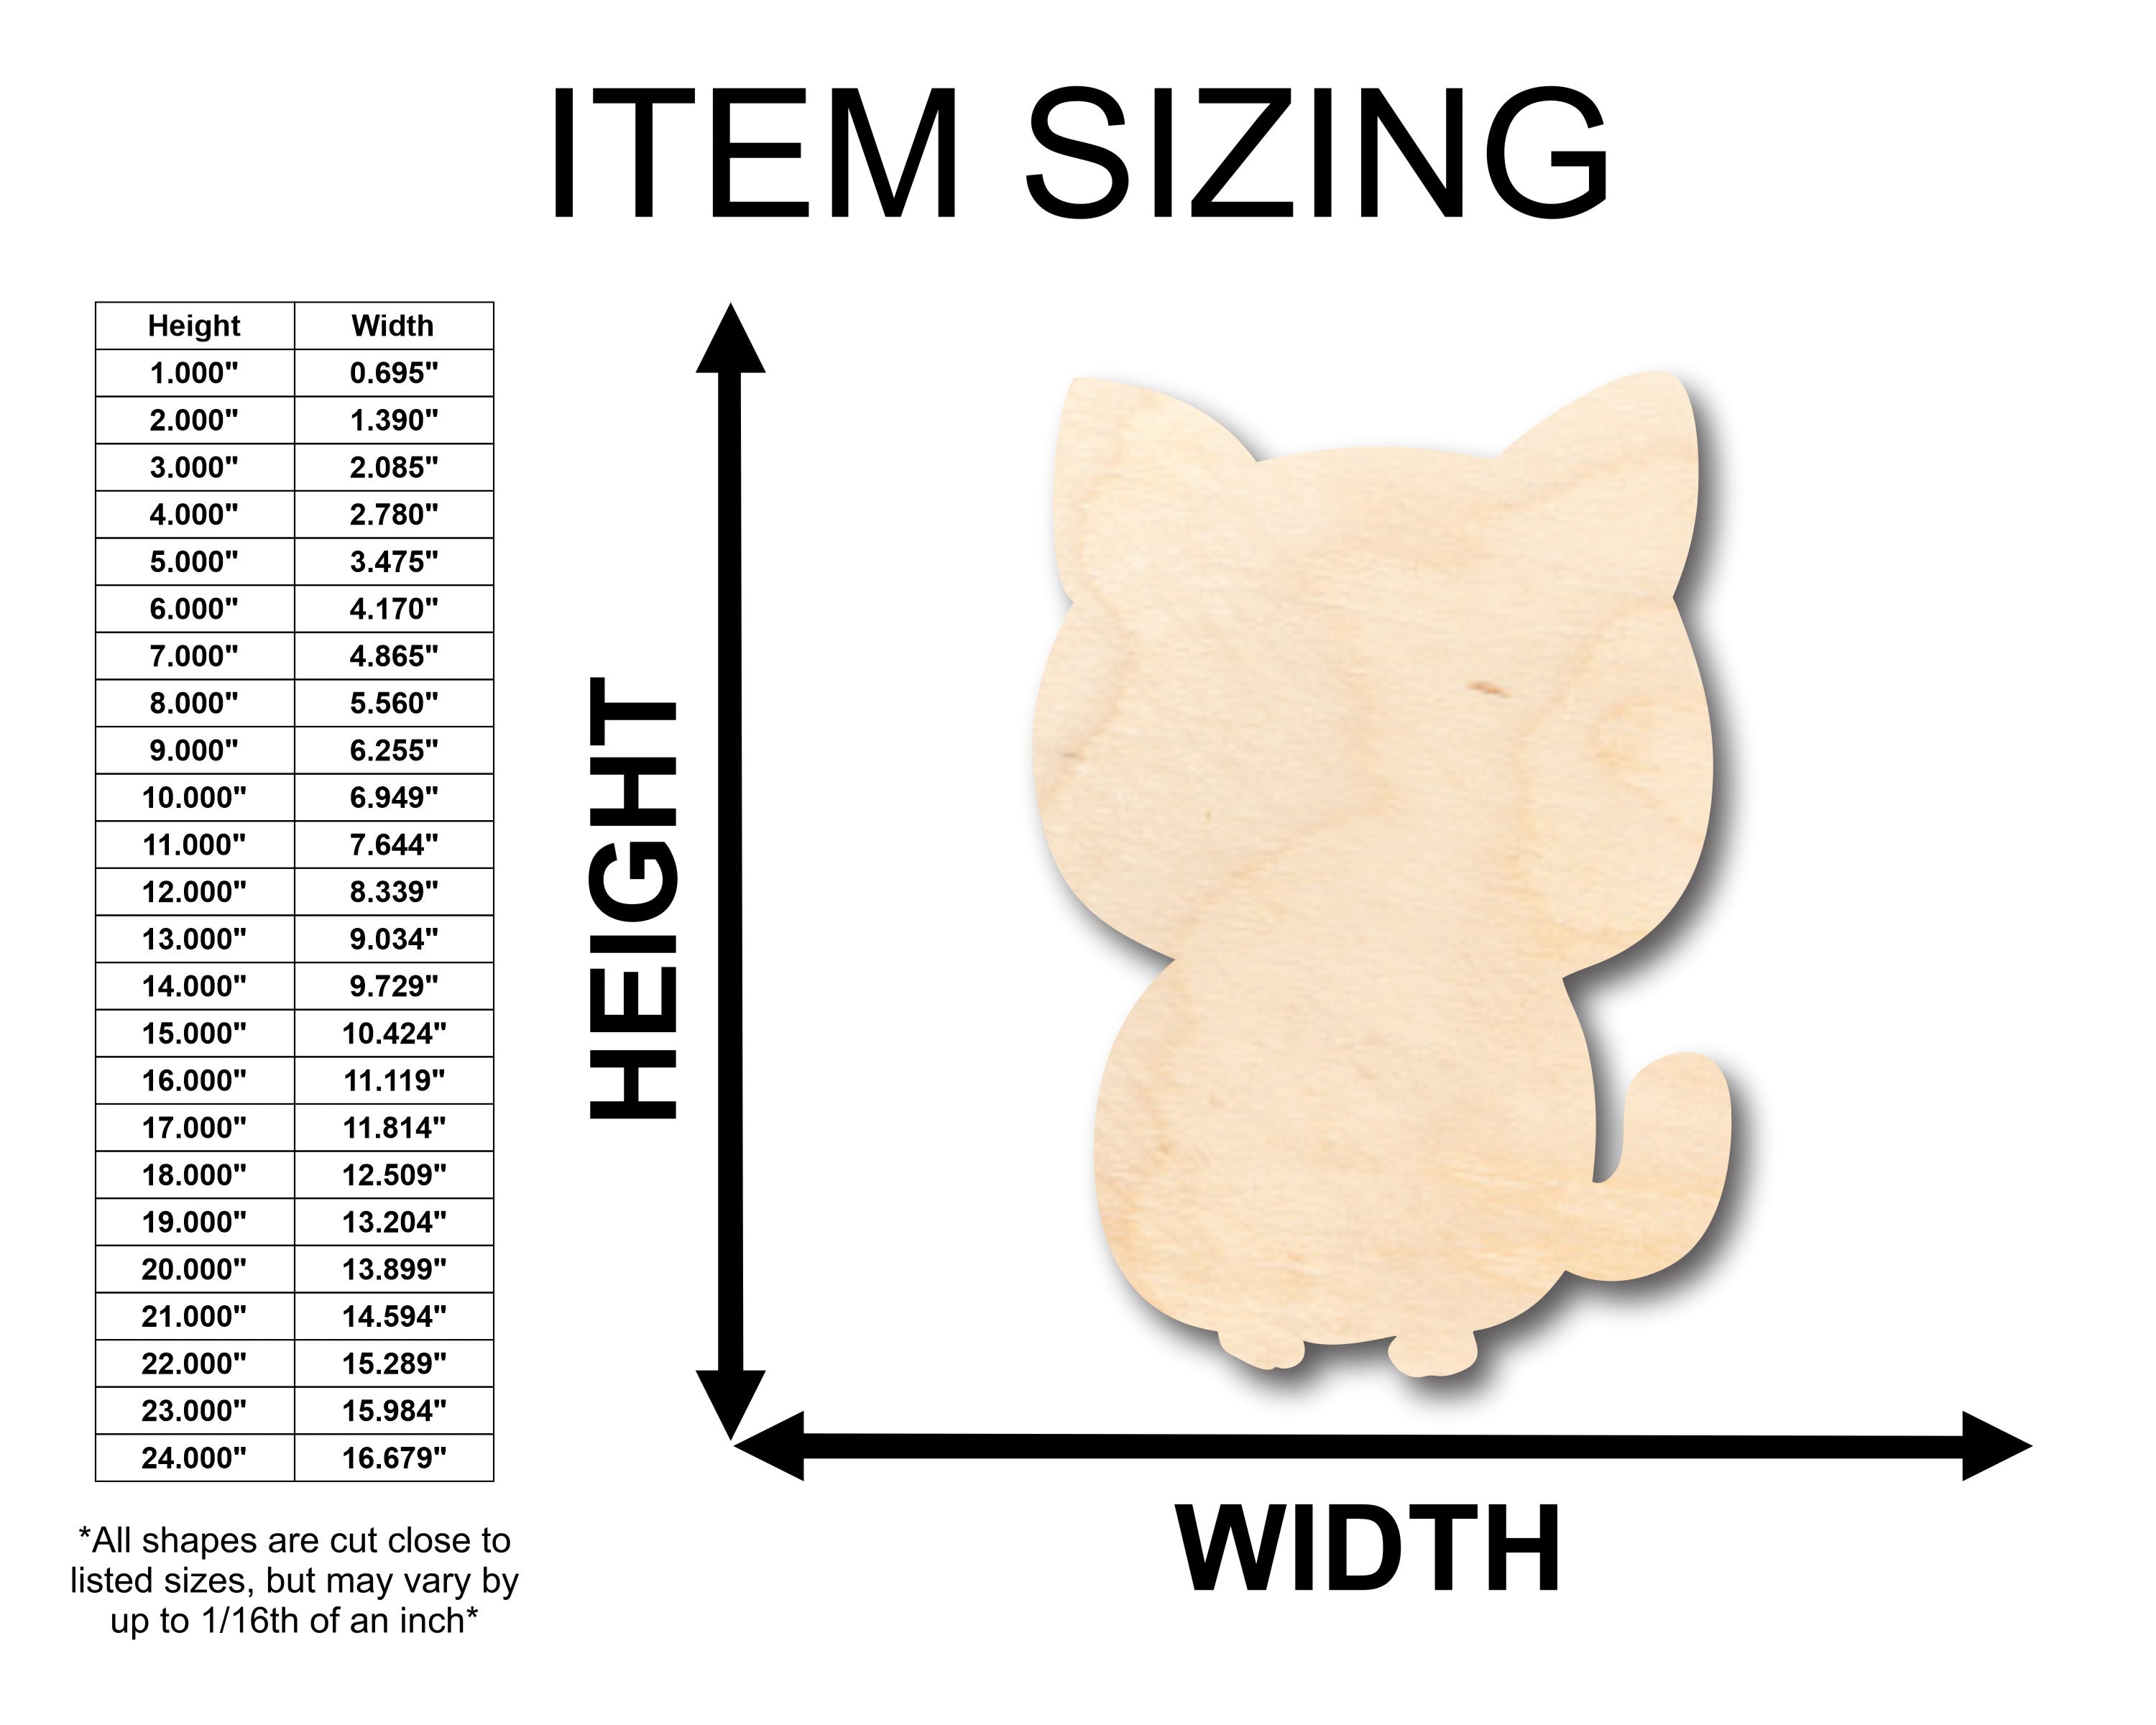 Unfinished Wood Cute Cat Shape - Craft - up to 36